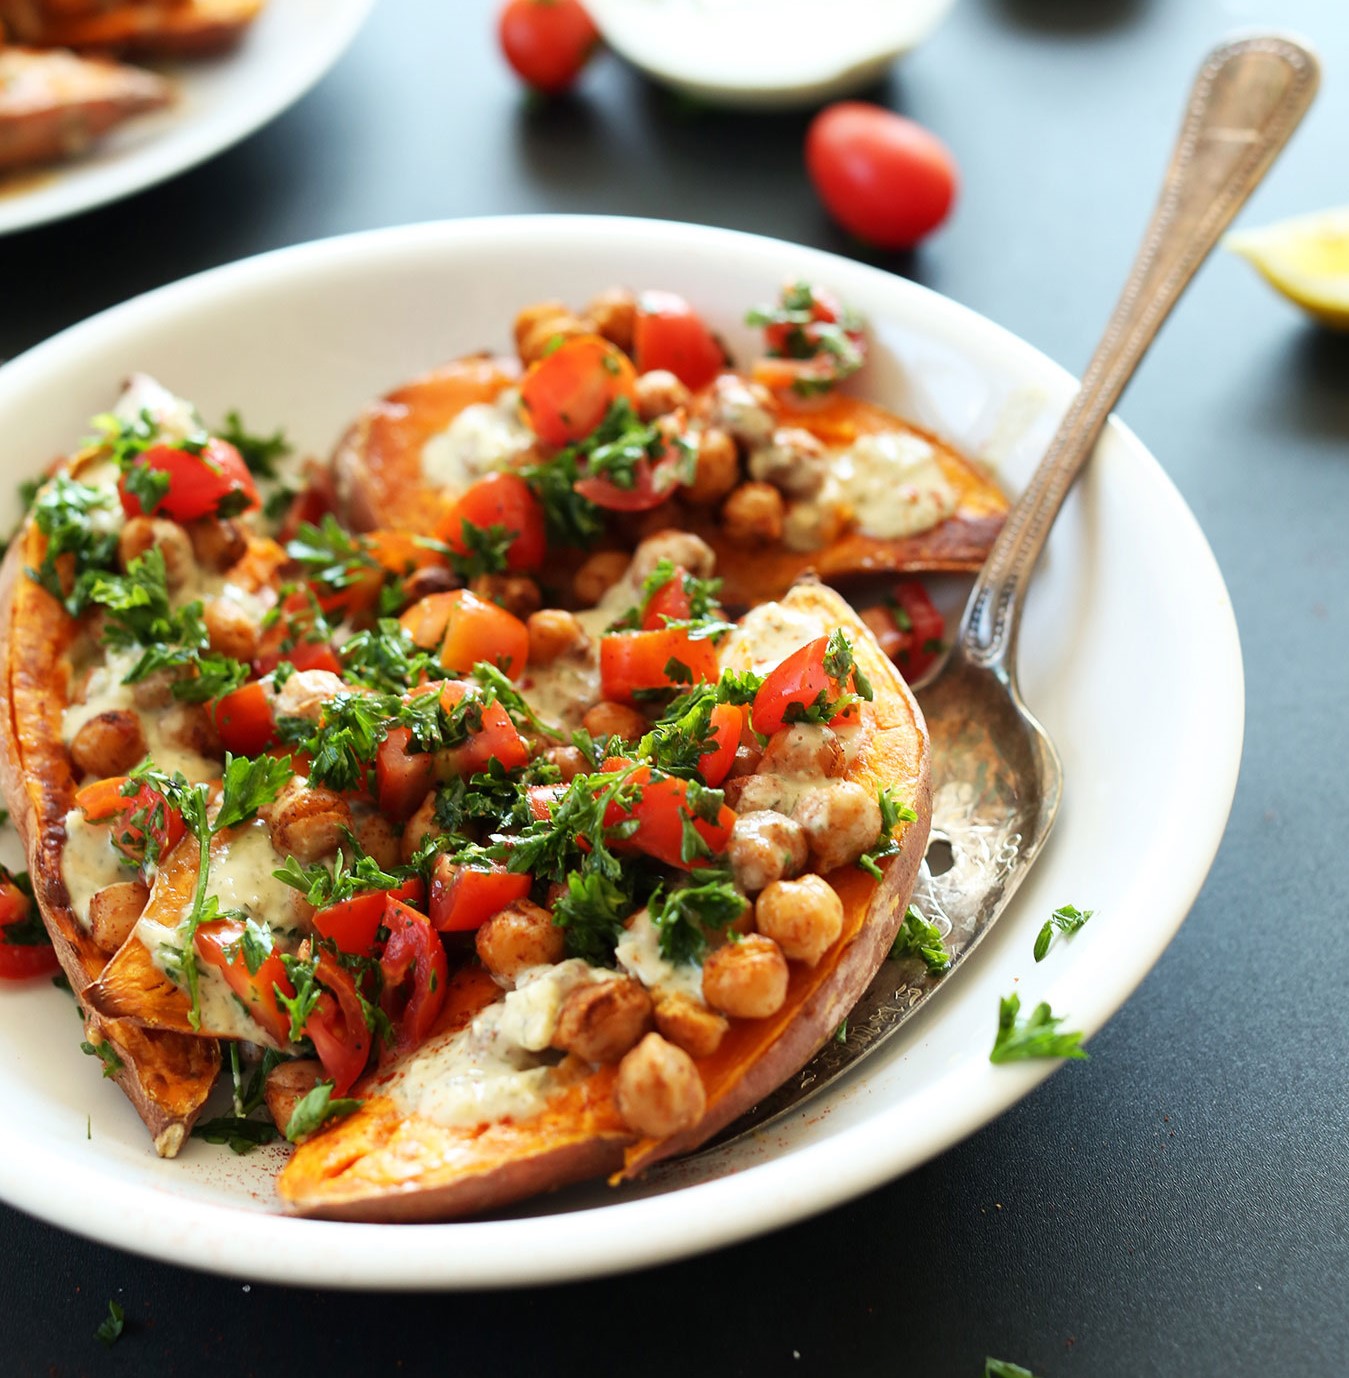 roasted sweet potatoes with chickpea, tomato, parsley topping